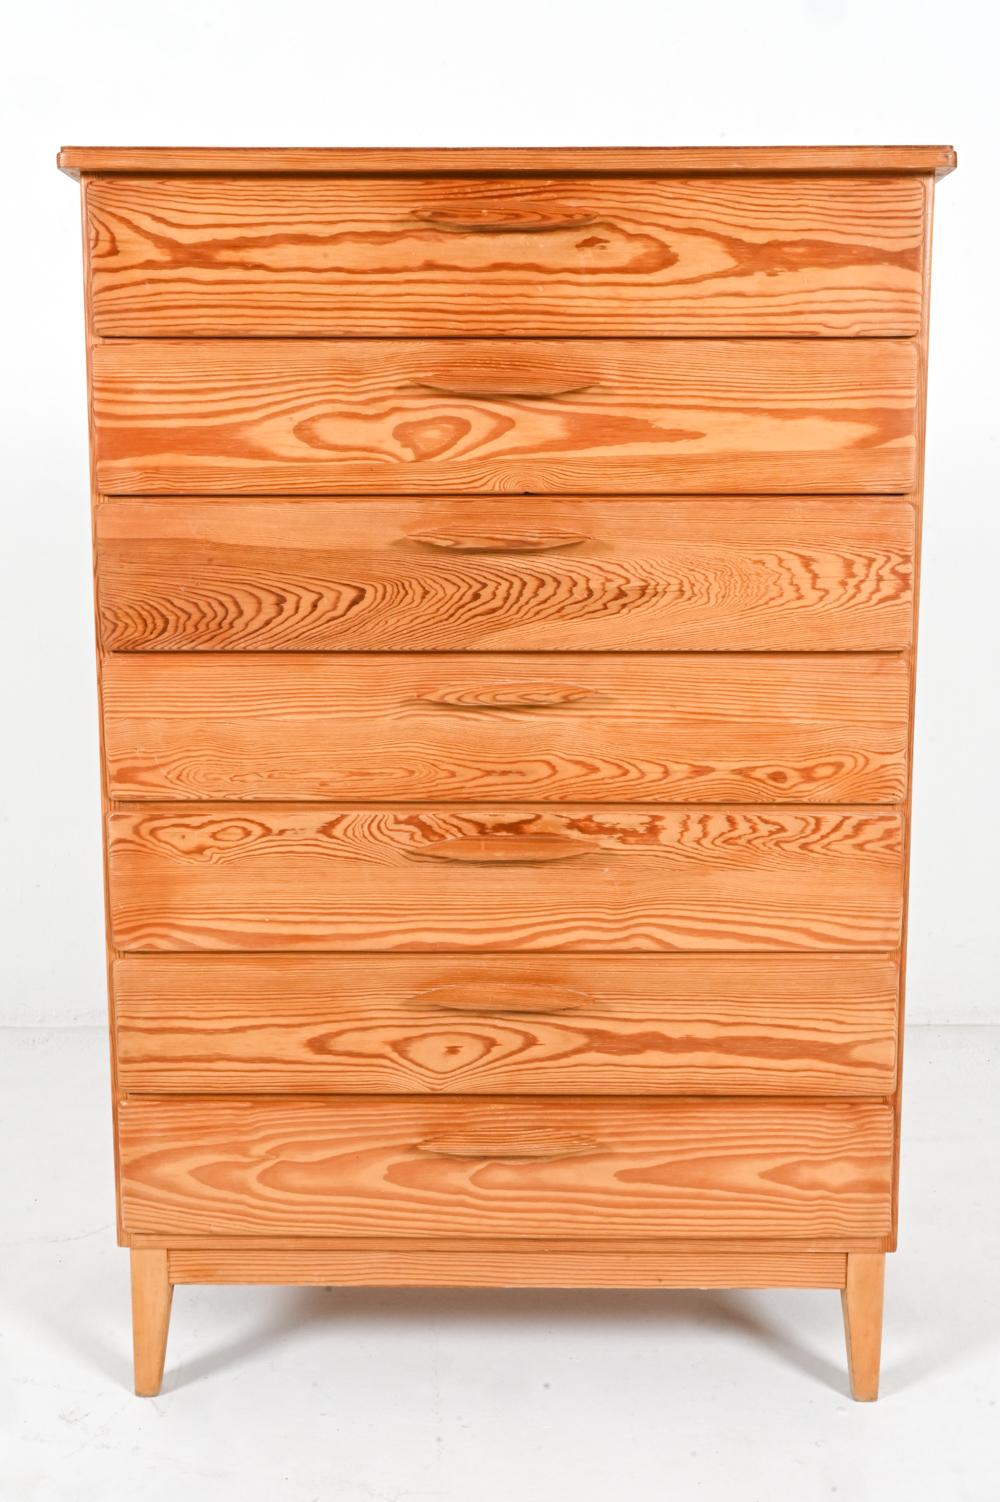 Swedish Modern Pine Tall Chest of Drawers, c. 1960's In Good Condition For Sale In Norwalk, CT